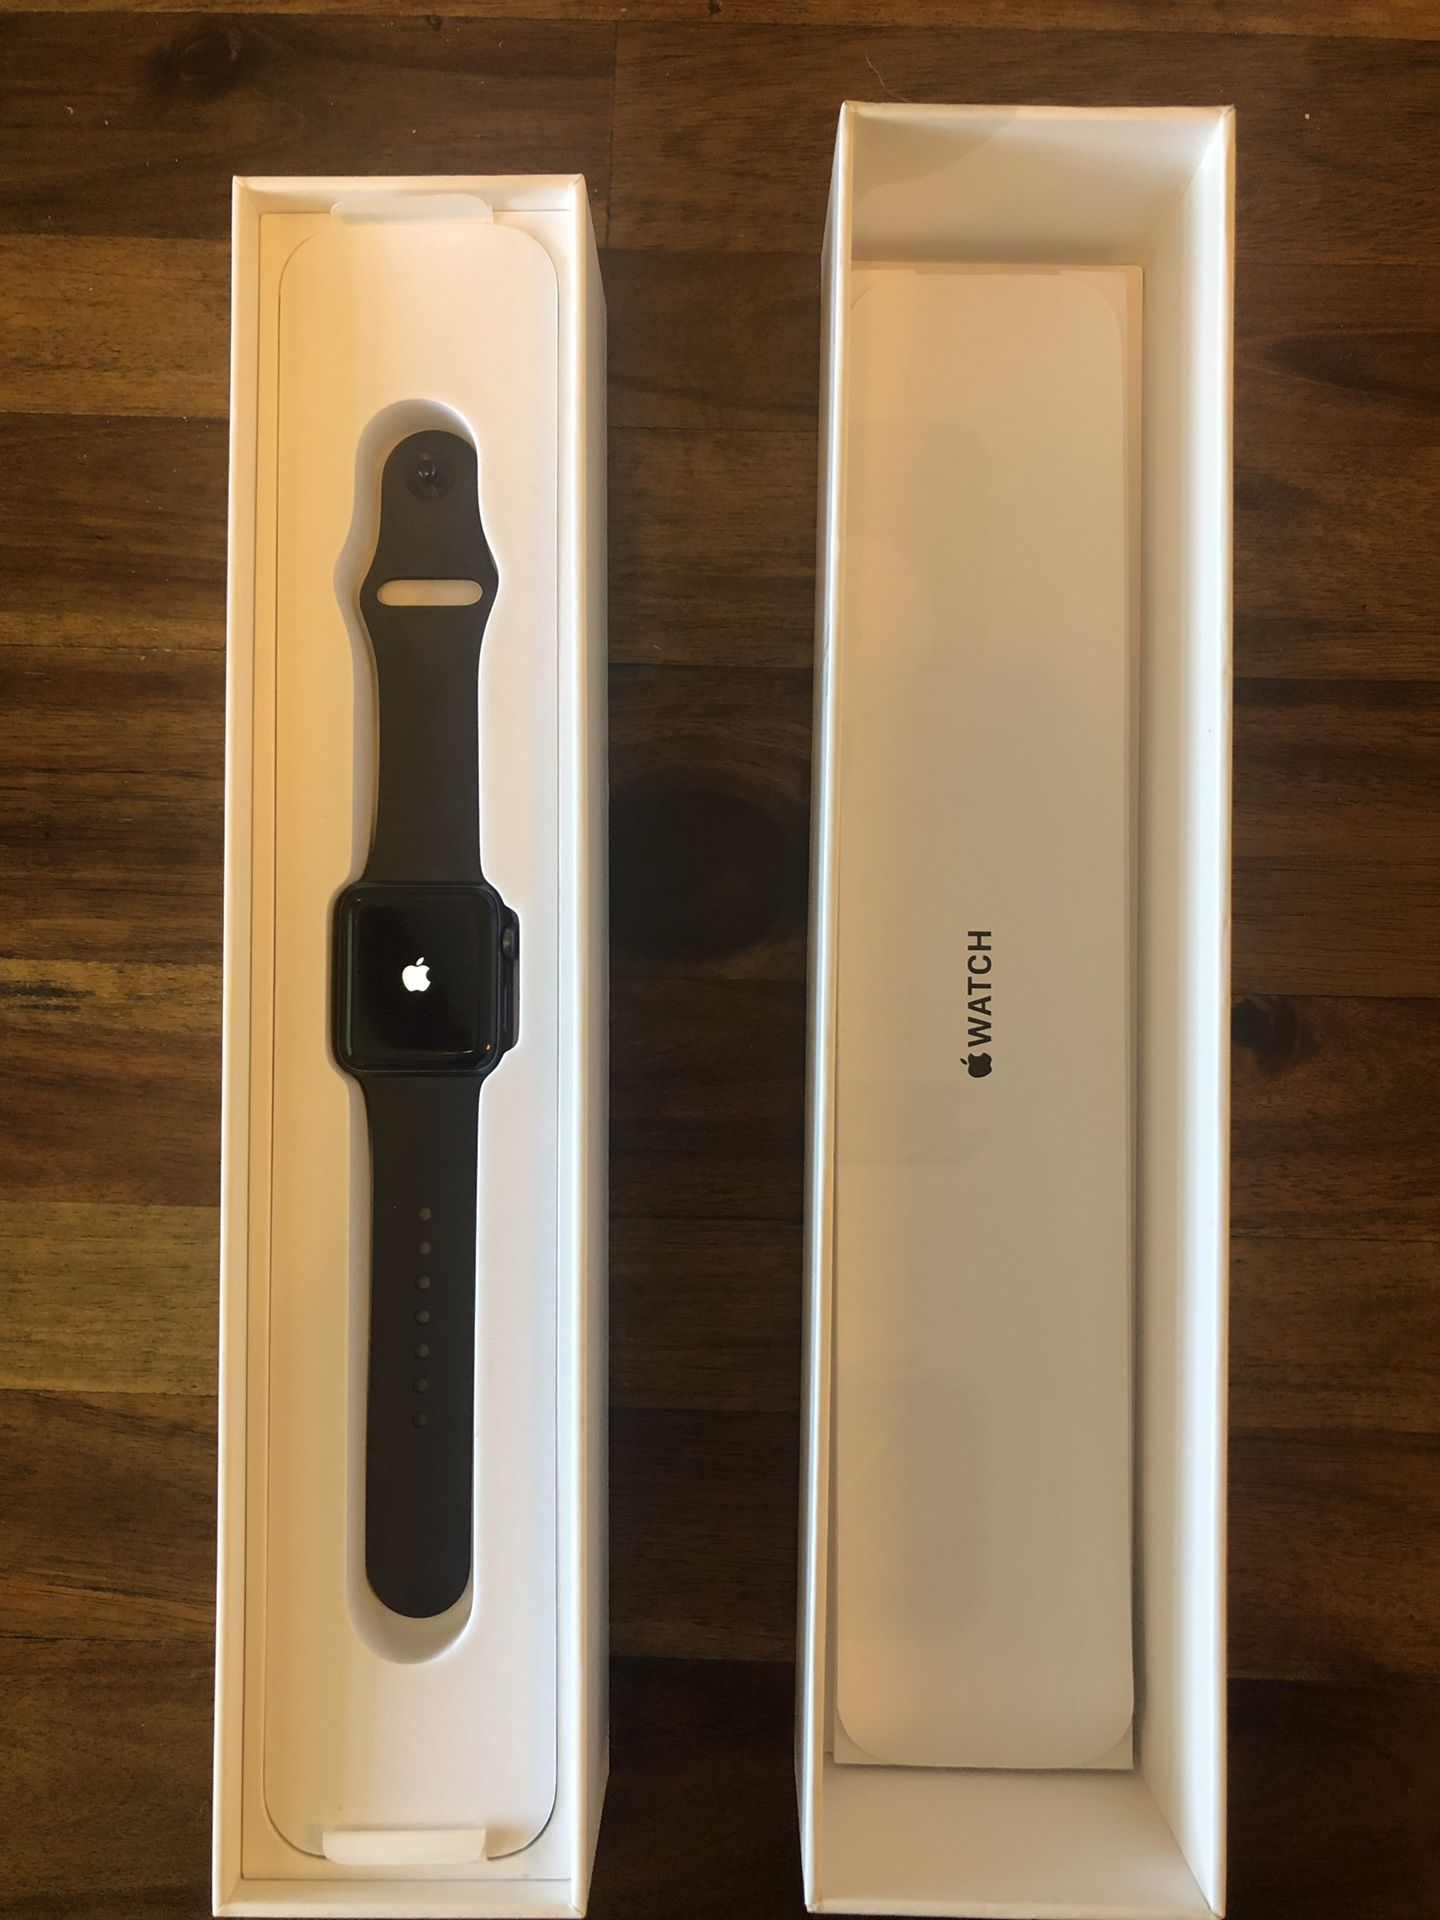 iwatch apple series 3 (color: space grey)